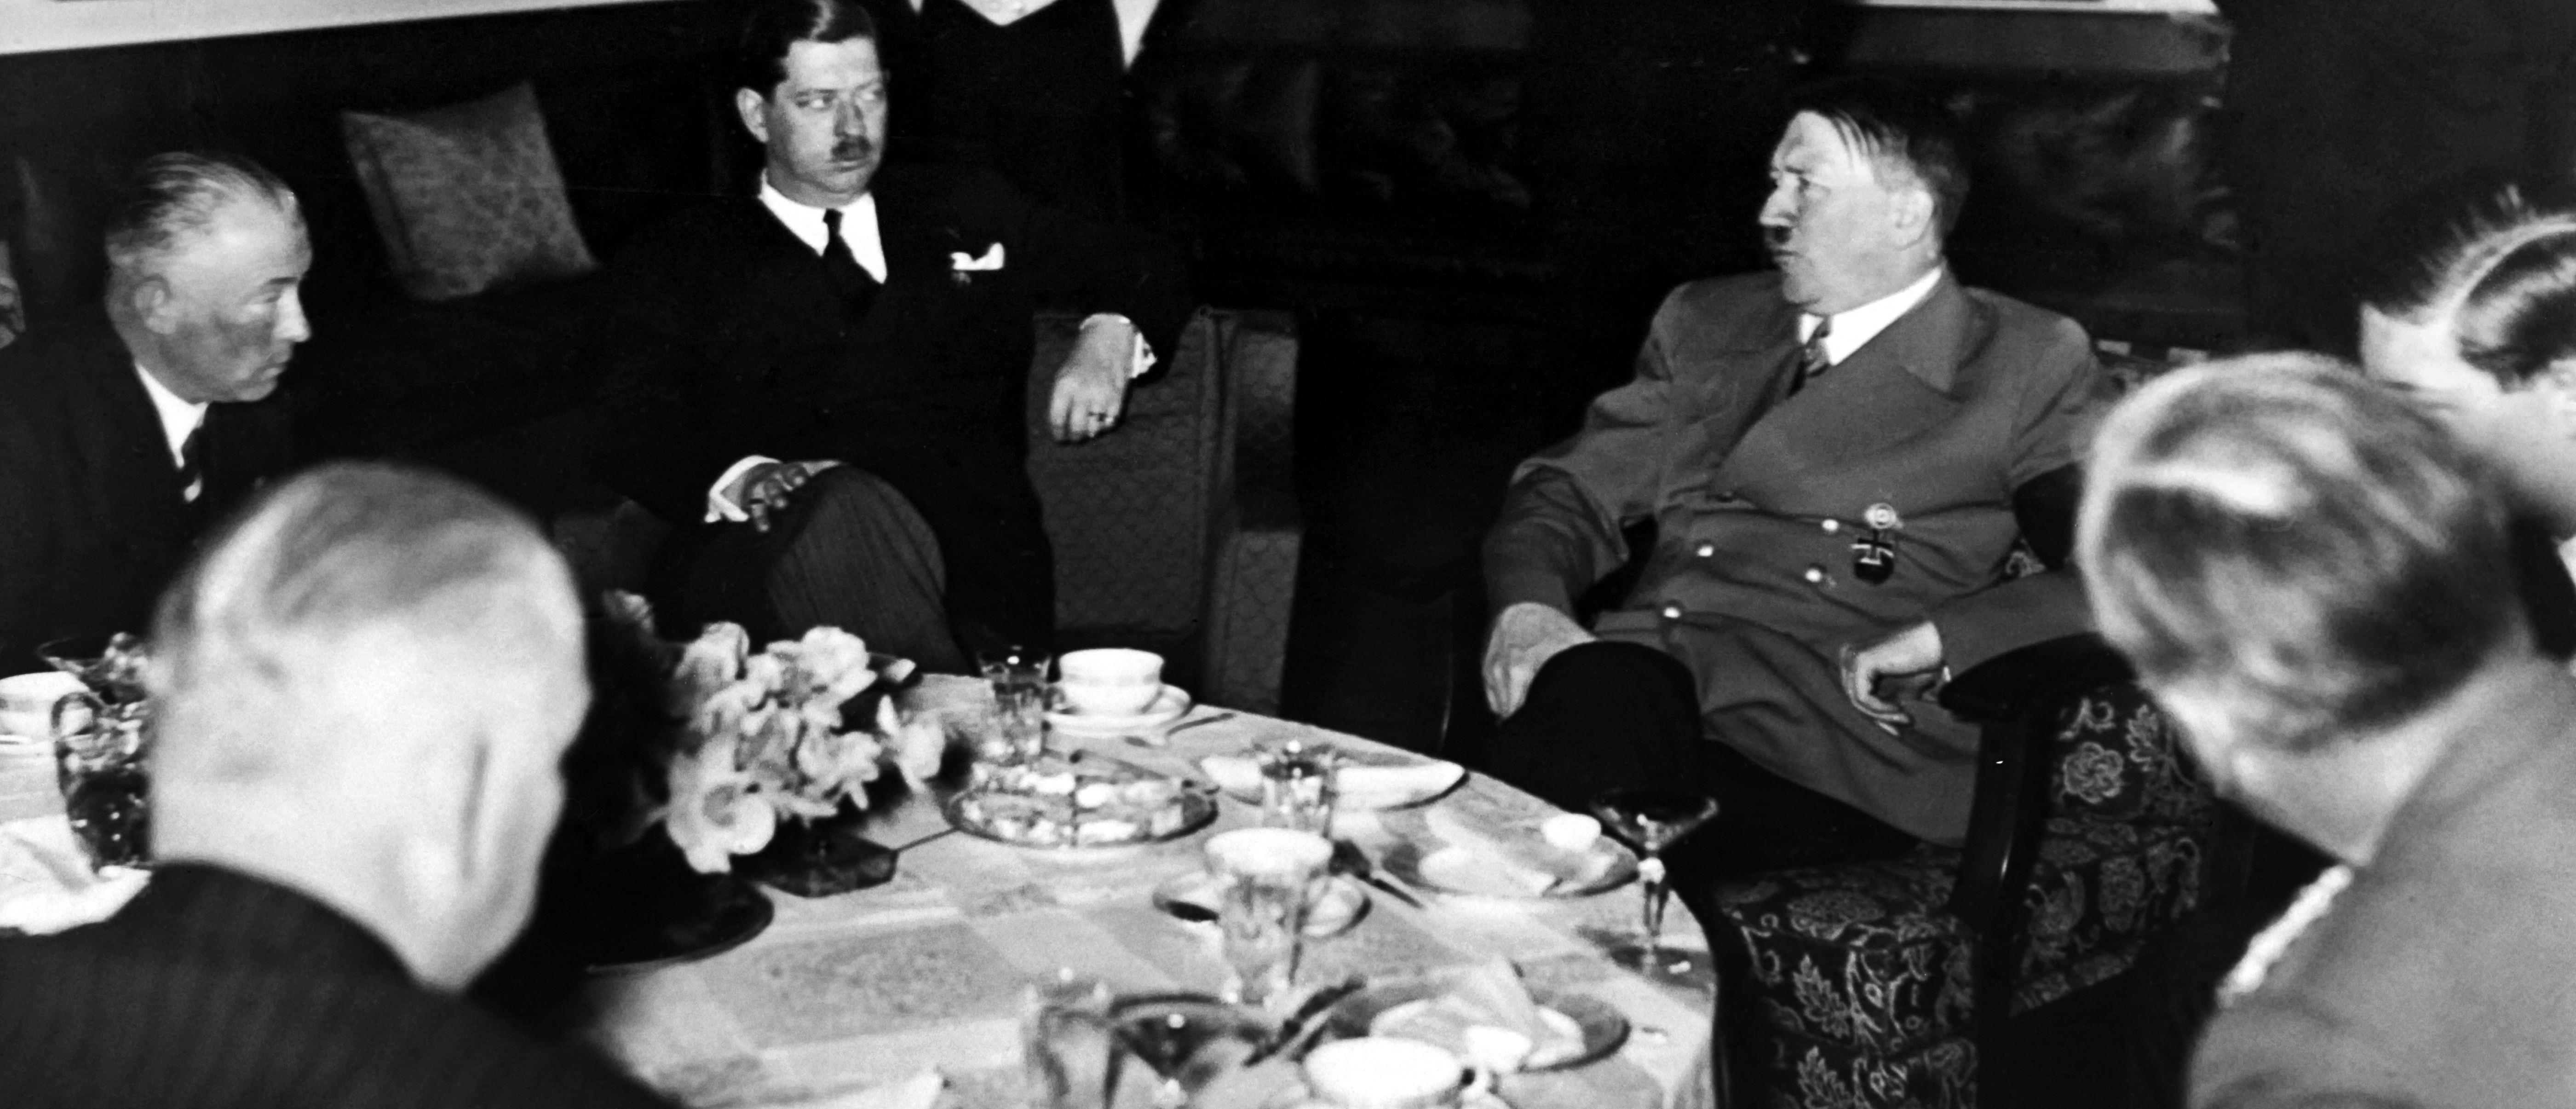 Prime Ministers Lord Neville Chamberlain, Edouard Daladier, Adolf Hitler, Benito Mussolini Berchesgaden  gathered on 29 September, 1938 to sign the Munich treaty.